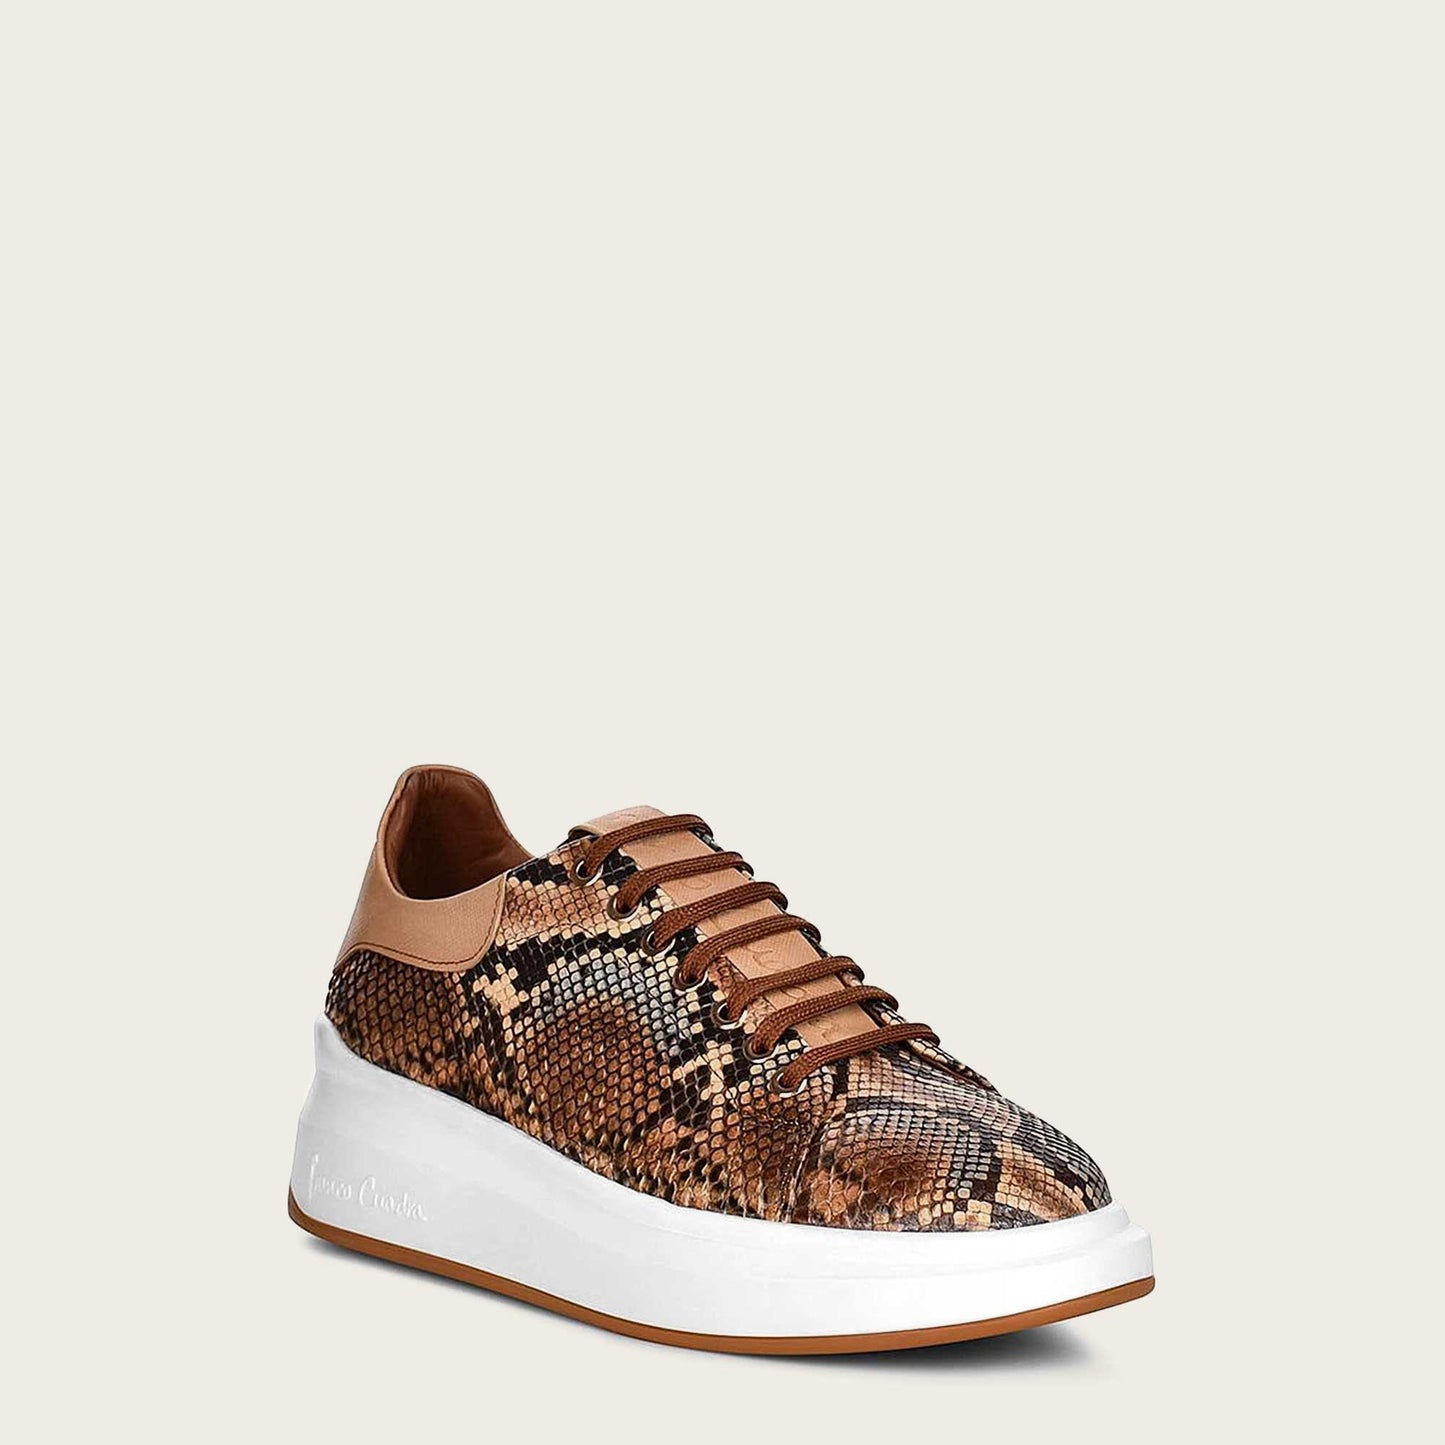 Genuine python brown leather sneakers